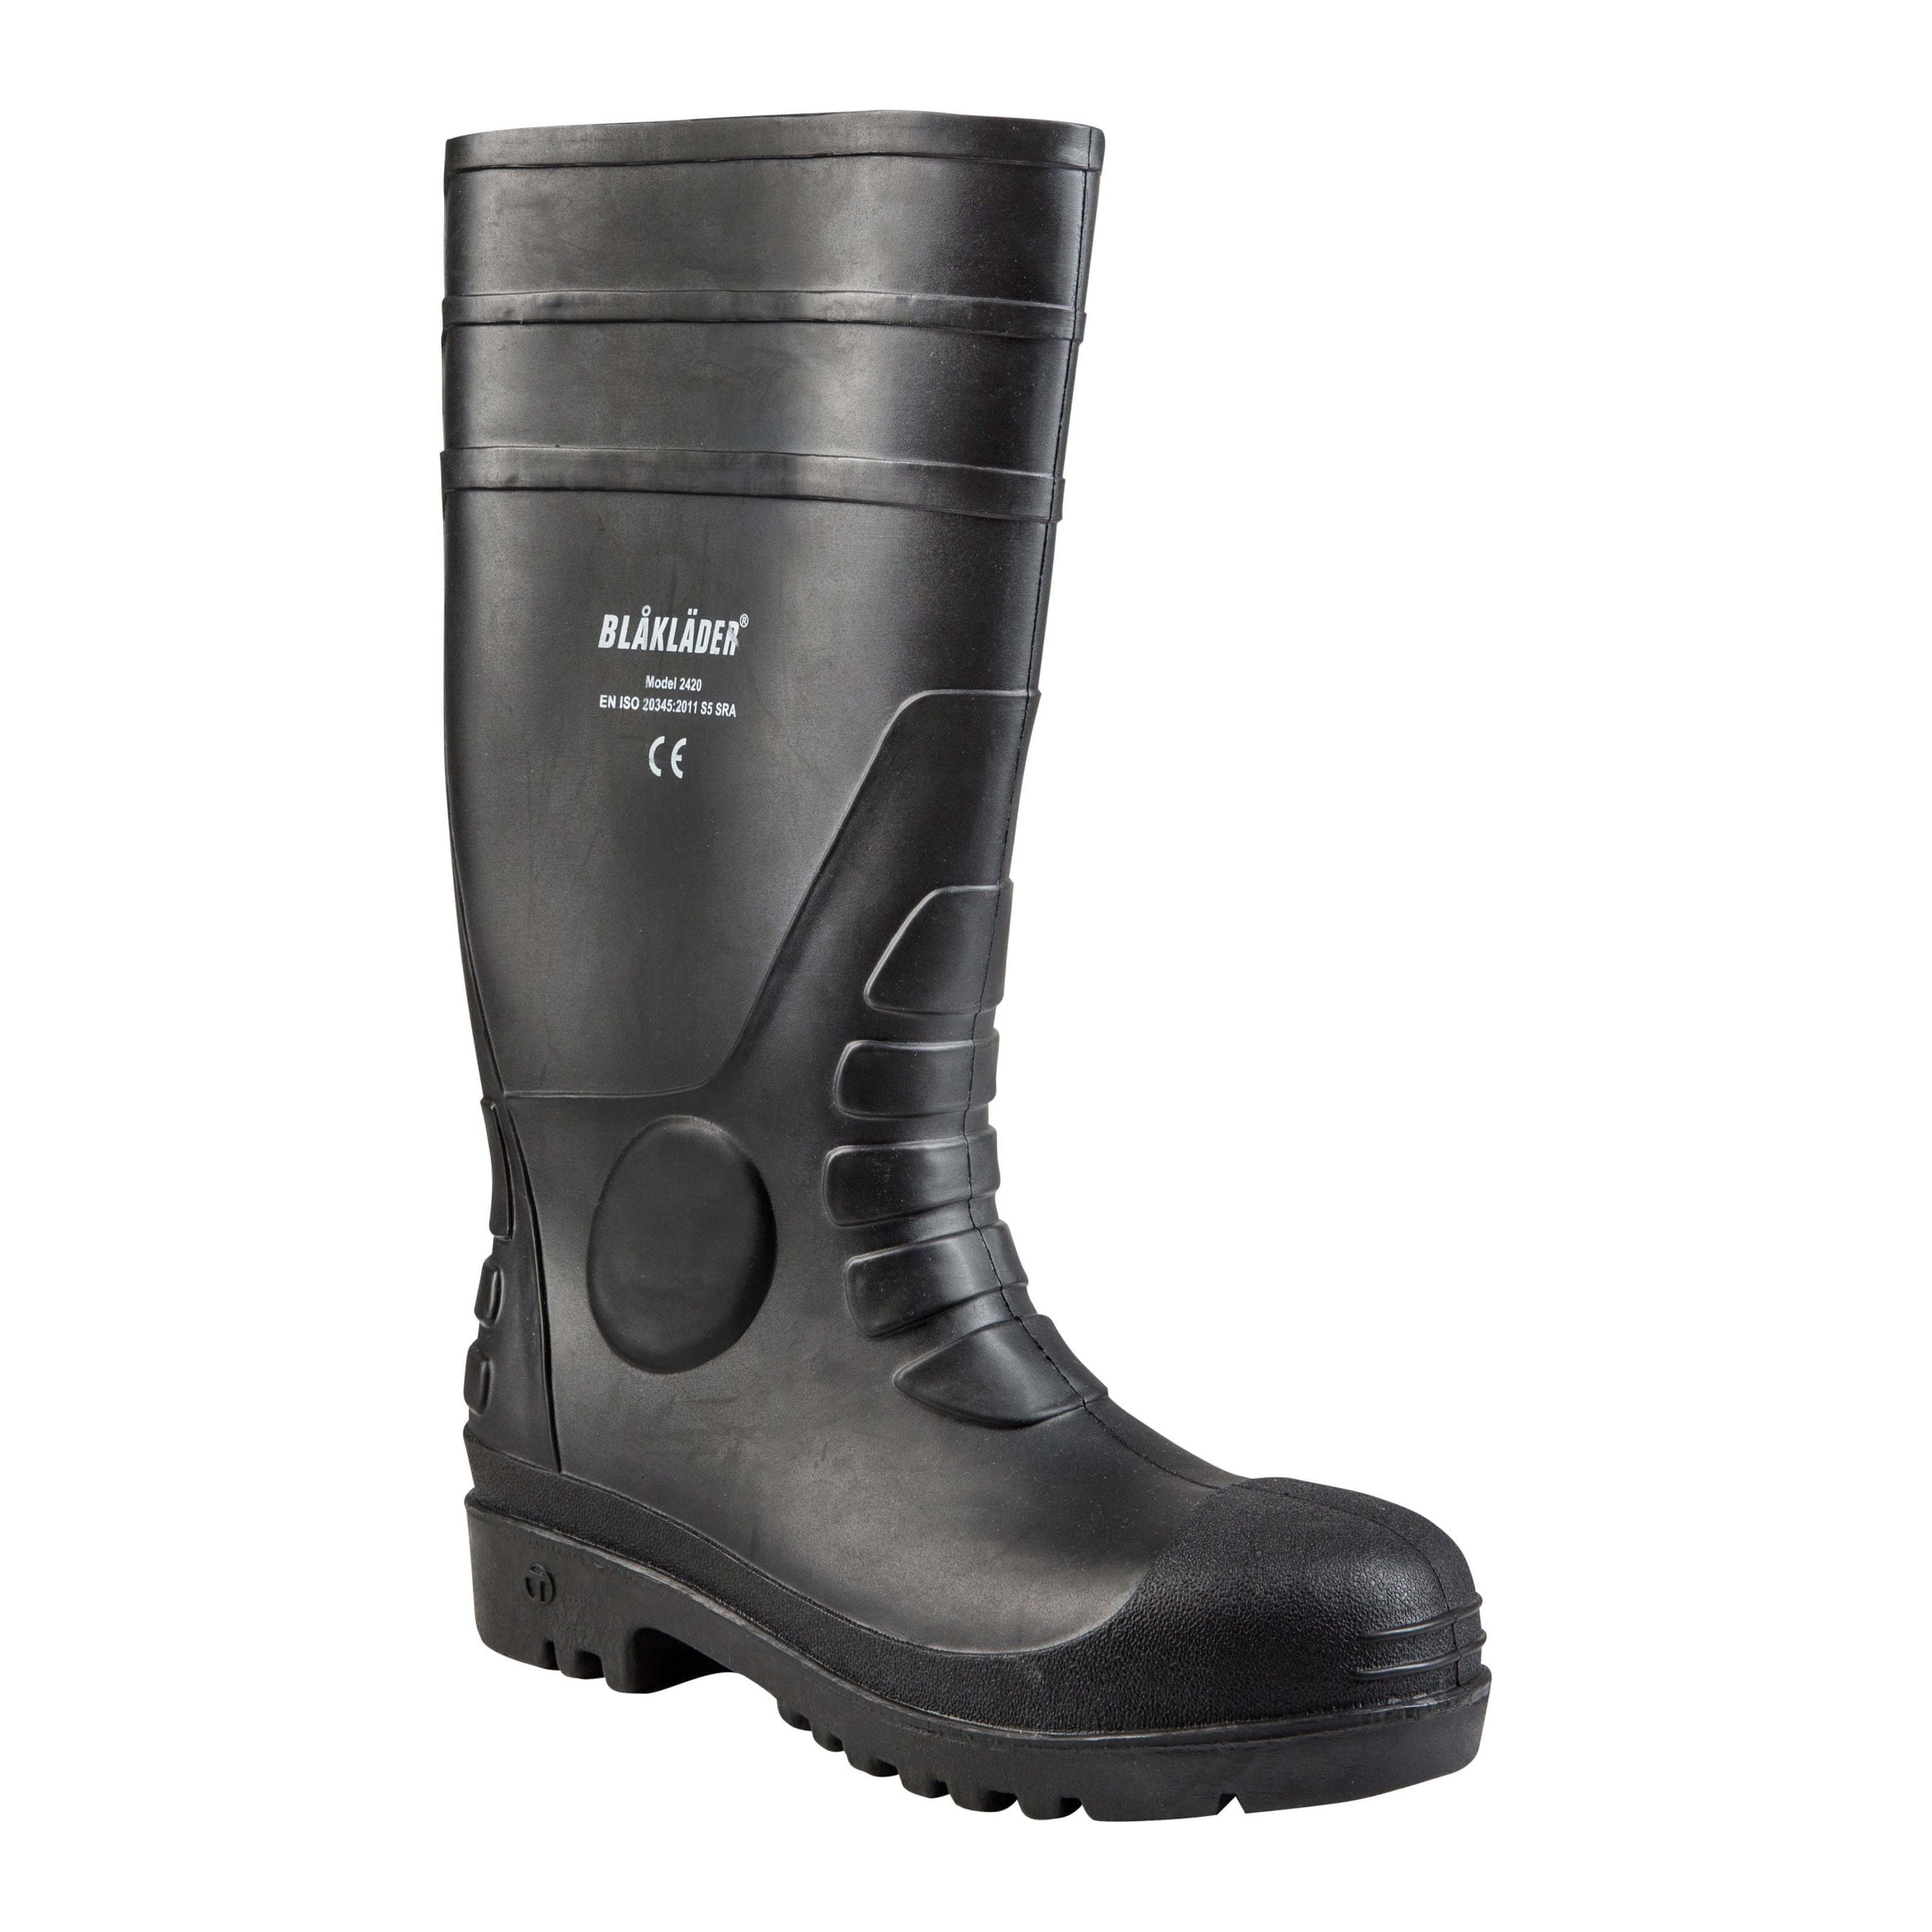 Blaklader 2420 Safety Rubber Boot S5 Toe Cap - Mens (24200000) - Sale